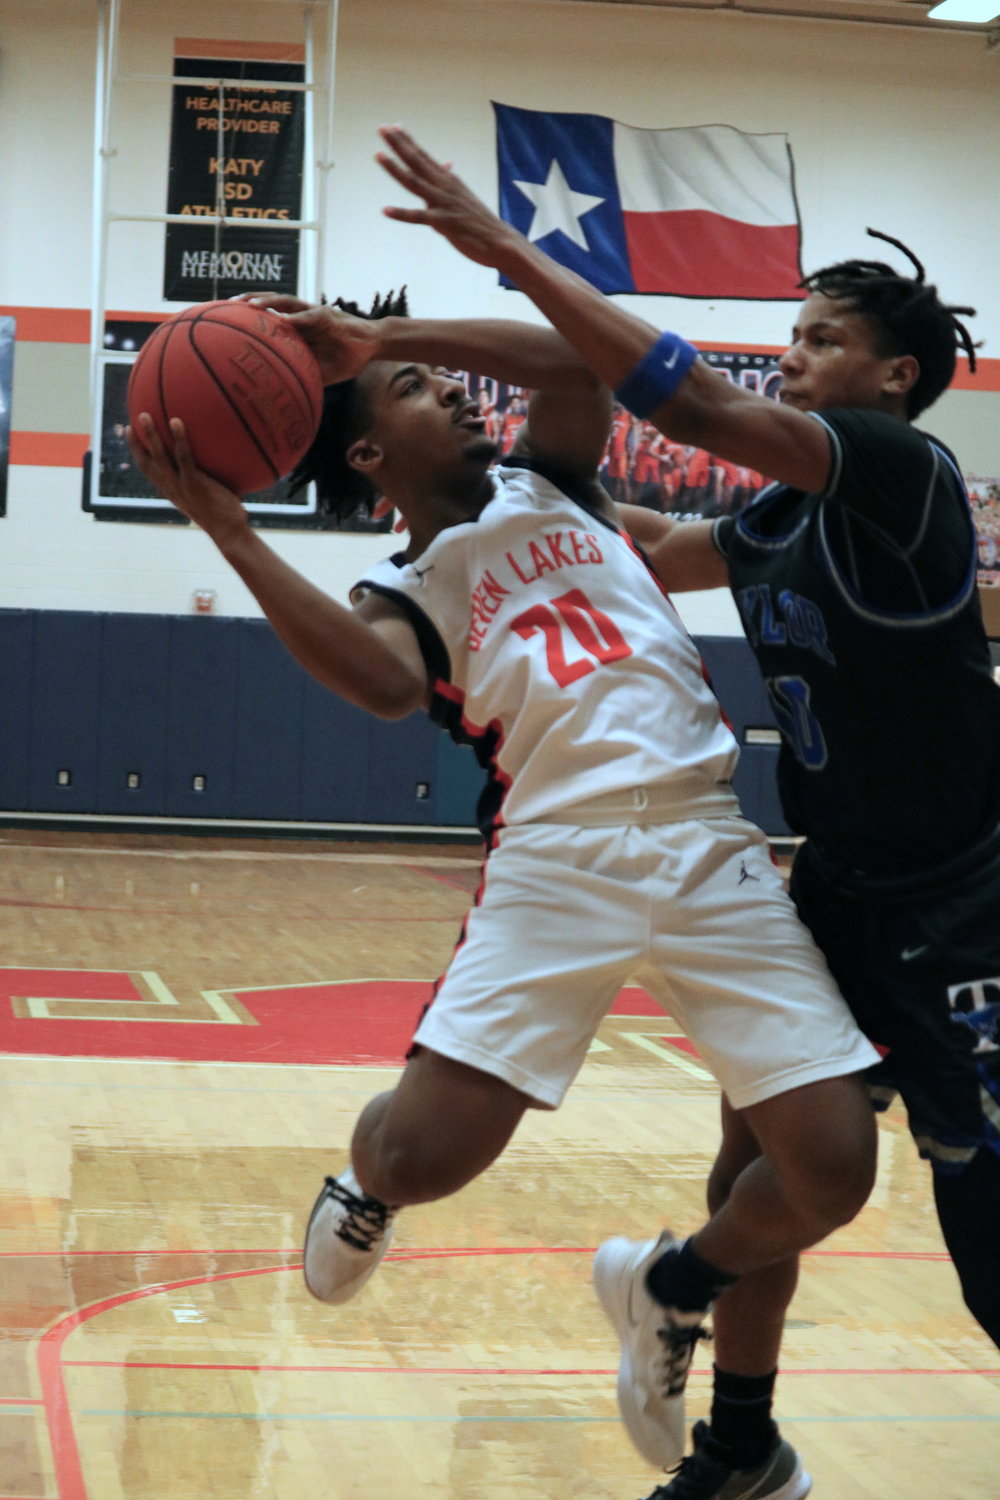 Steve Bluiett shoots over a defender during Wednesday’s game between Seven Lakes and Taylor at the Seven Lakes gym.